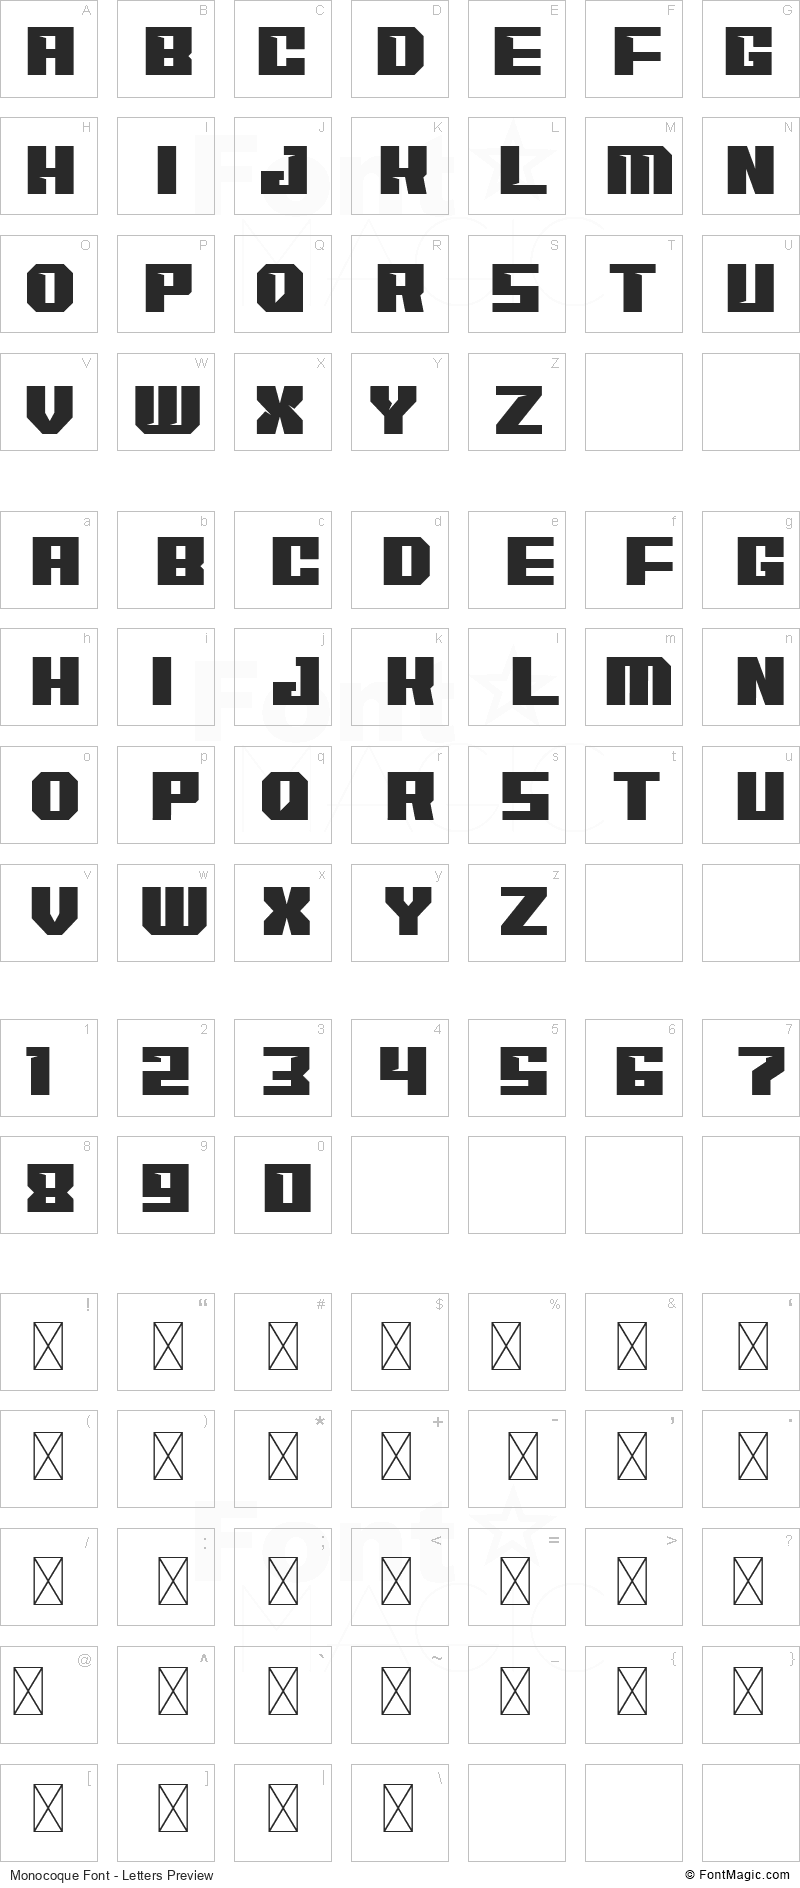 Monocoque Font - All Latters Preview Chart